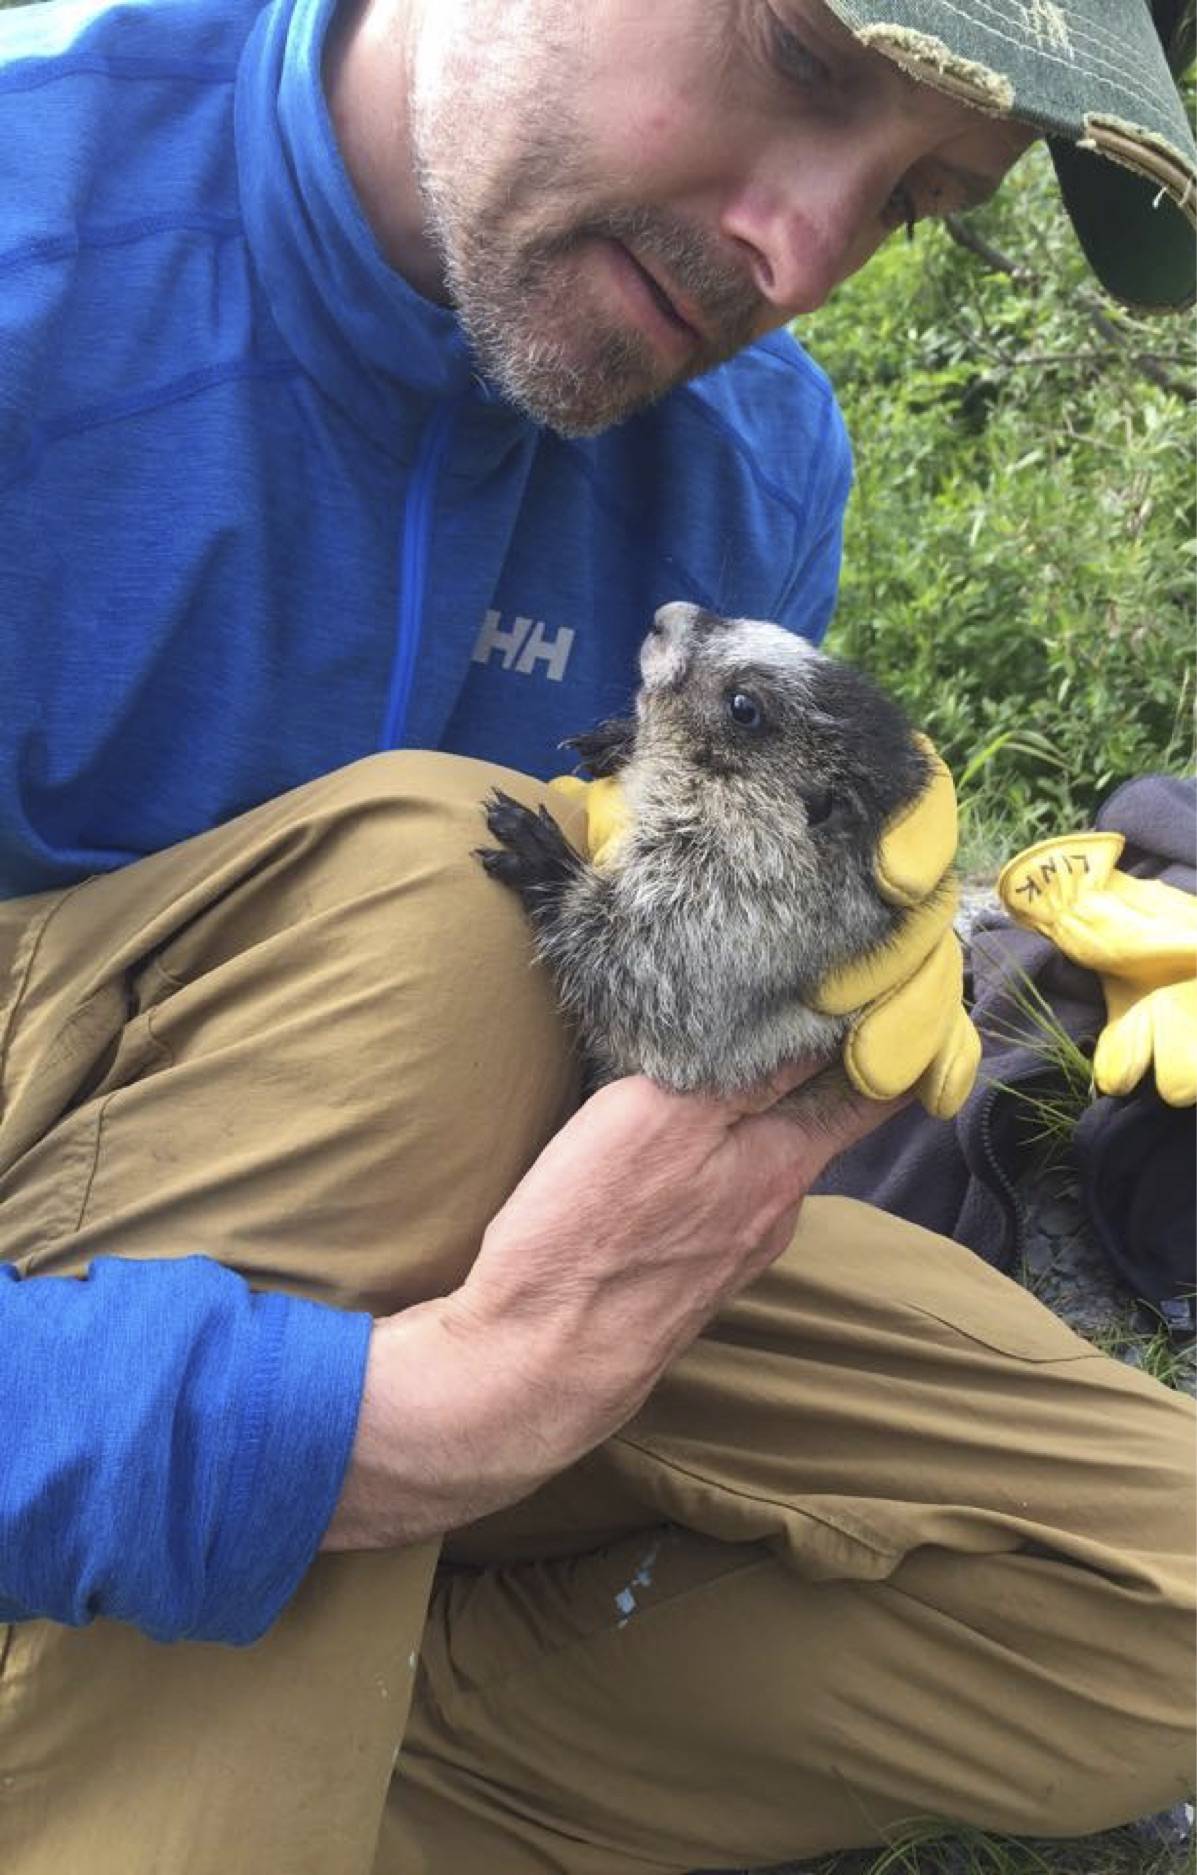 University of Alaska professor and UA Museum of the North curator Dr. Link Olson works with a baby marmot during a scientific study. (Courtesy photo | Kyndall Hildebrandt)